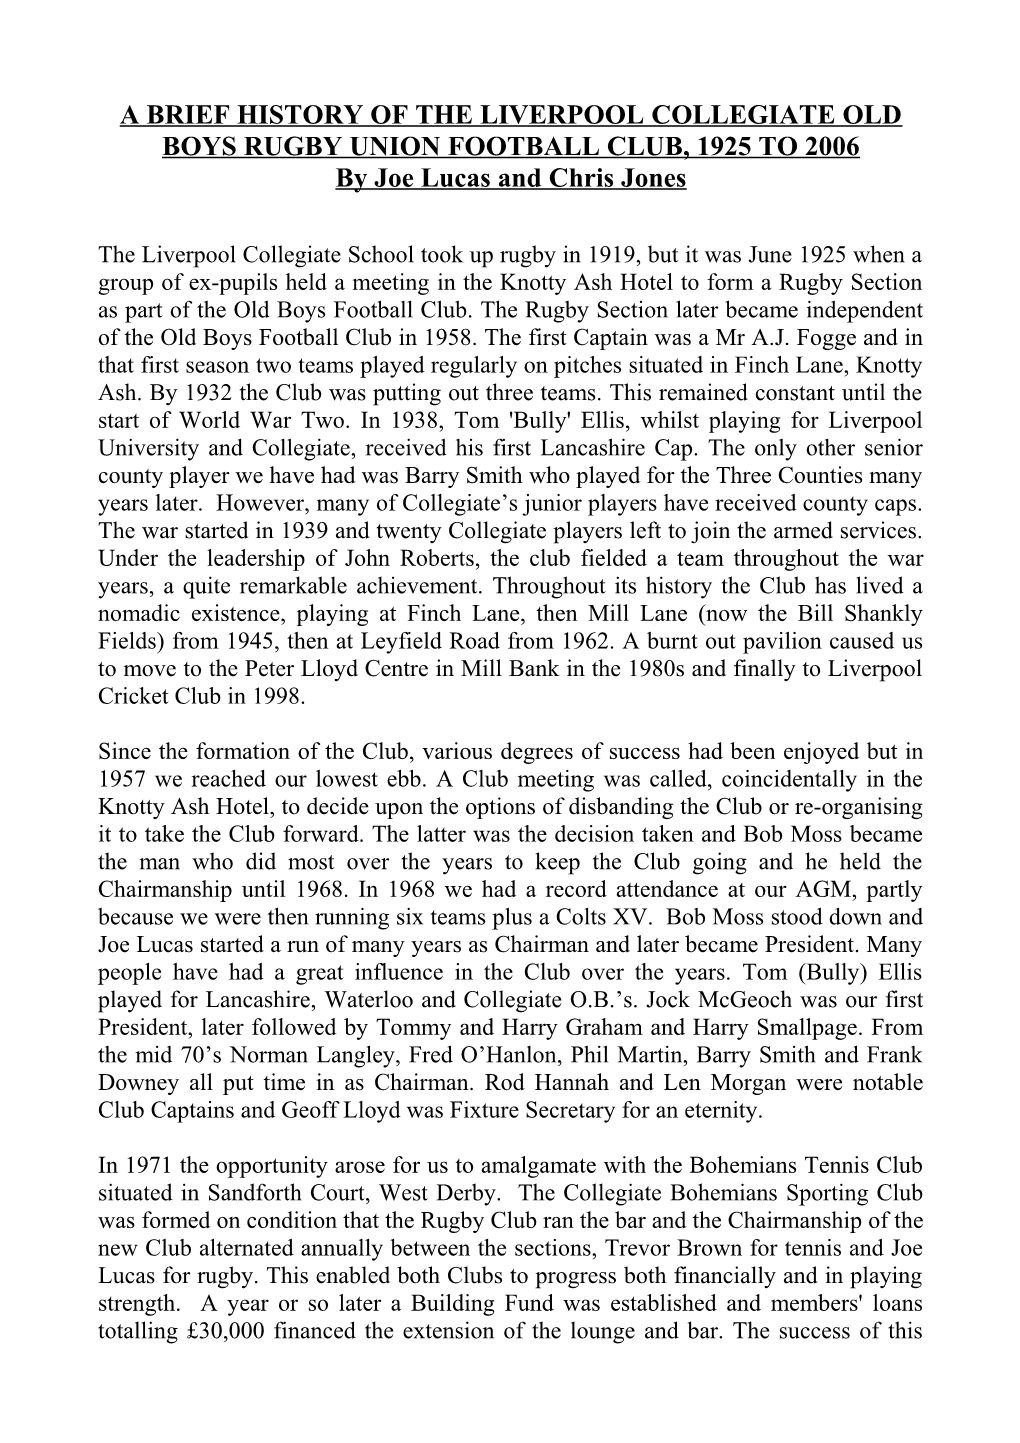 A Brief History of the Liverpool Collegiate Old Boys Rugby Union Football Club, 1925 to 1998